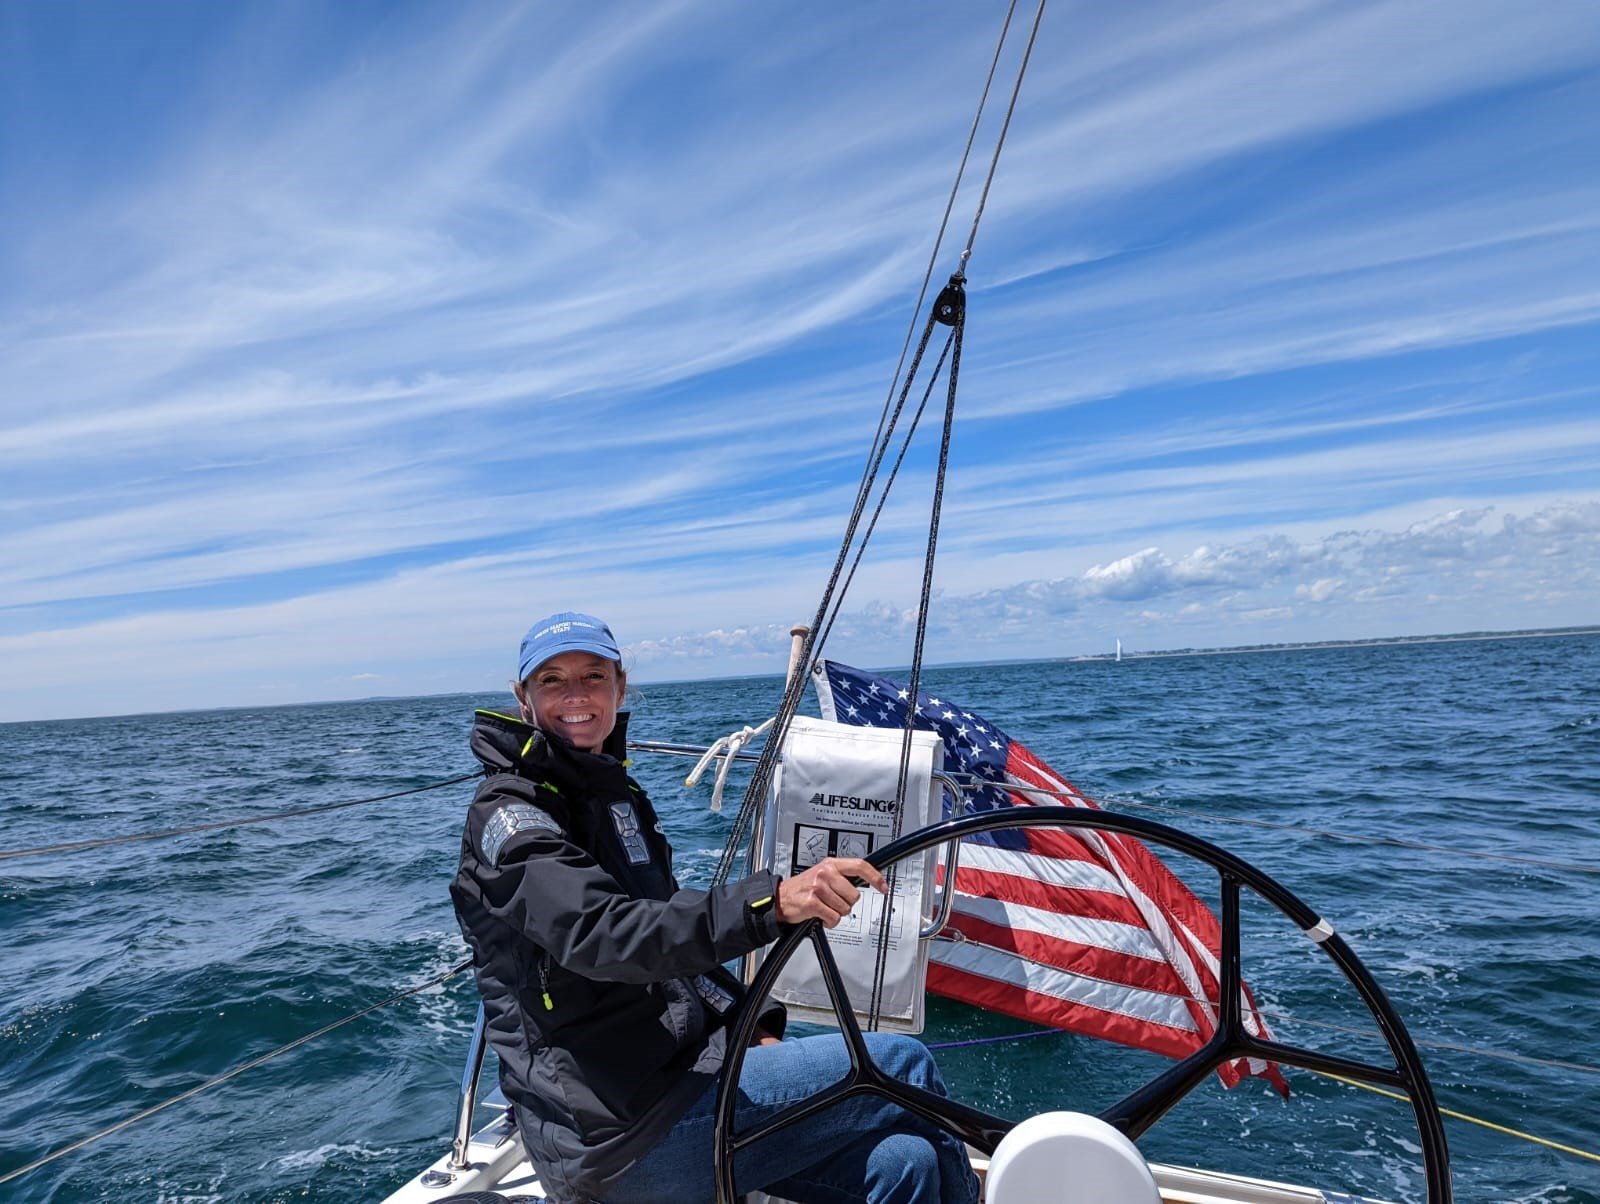 Senior Vice President of Curatorial Affairs and Senior Director of Museum Galleries at MSM, Christina Connett Brophy, PhD is a lifelong sailor who loves riding the breeze on both water and land.